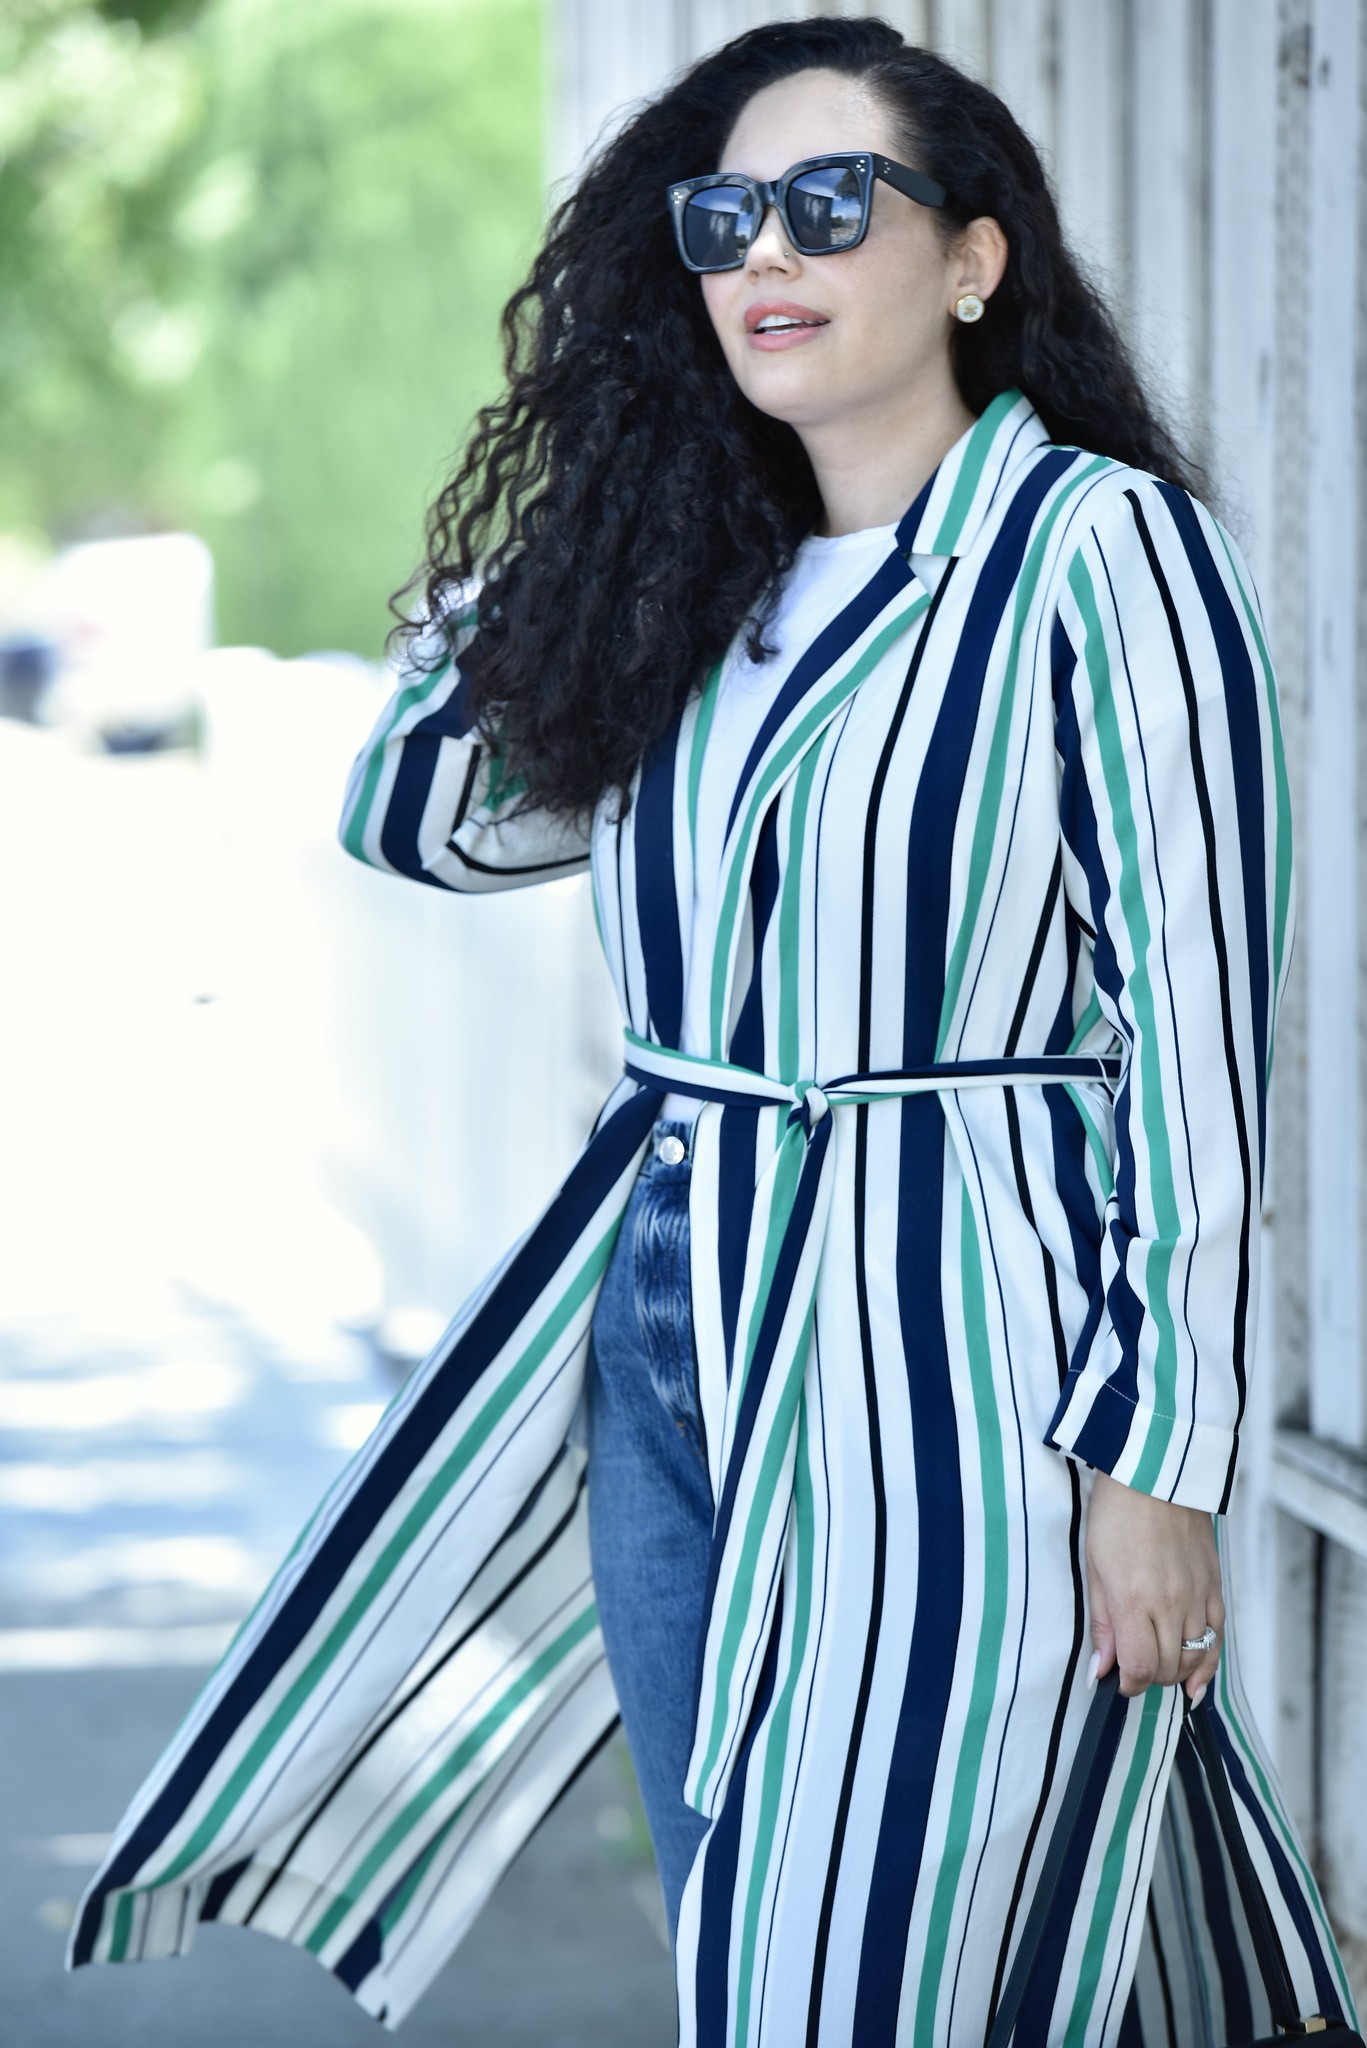 Wardrobe Must-Have- Soft, Summer Duster via @GirlWithCurves #boyfriend #jeans #trench #summer #stripes.